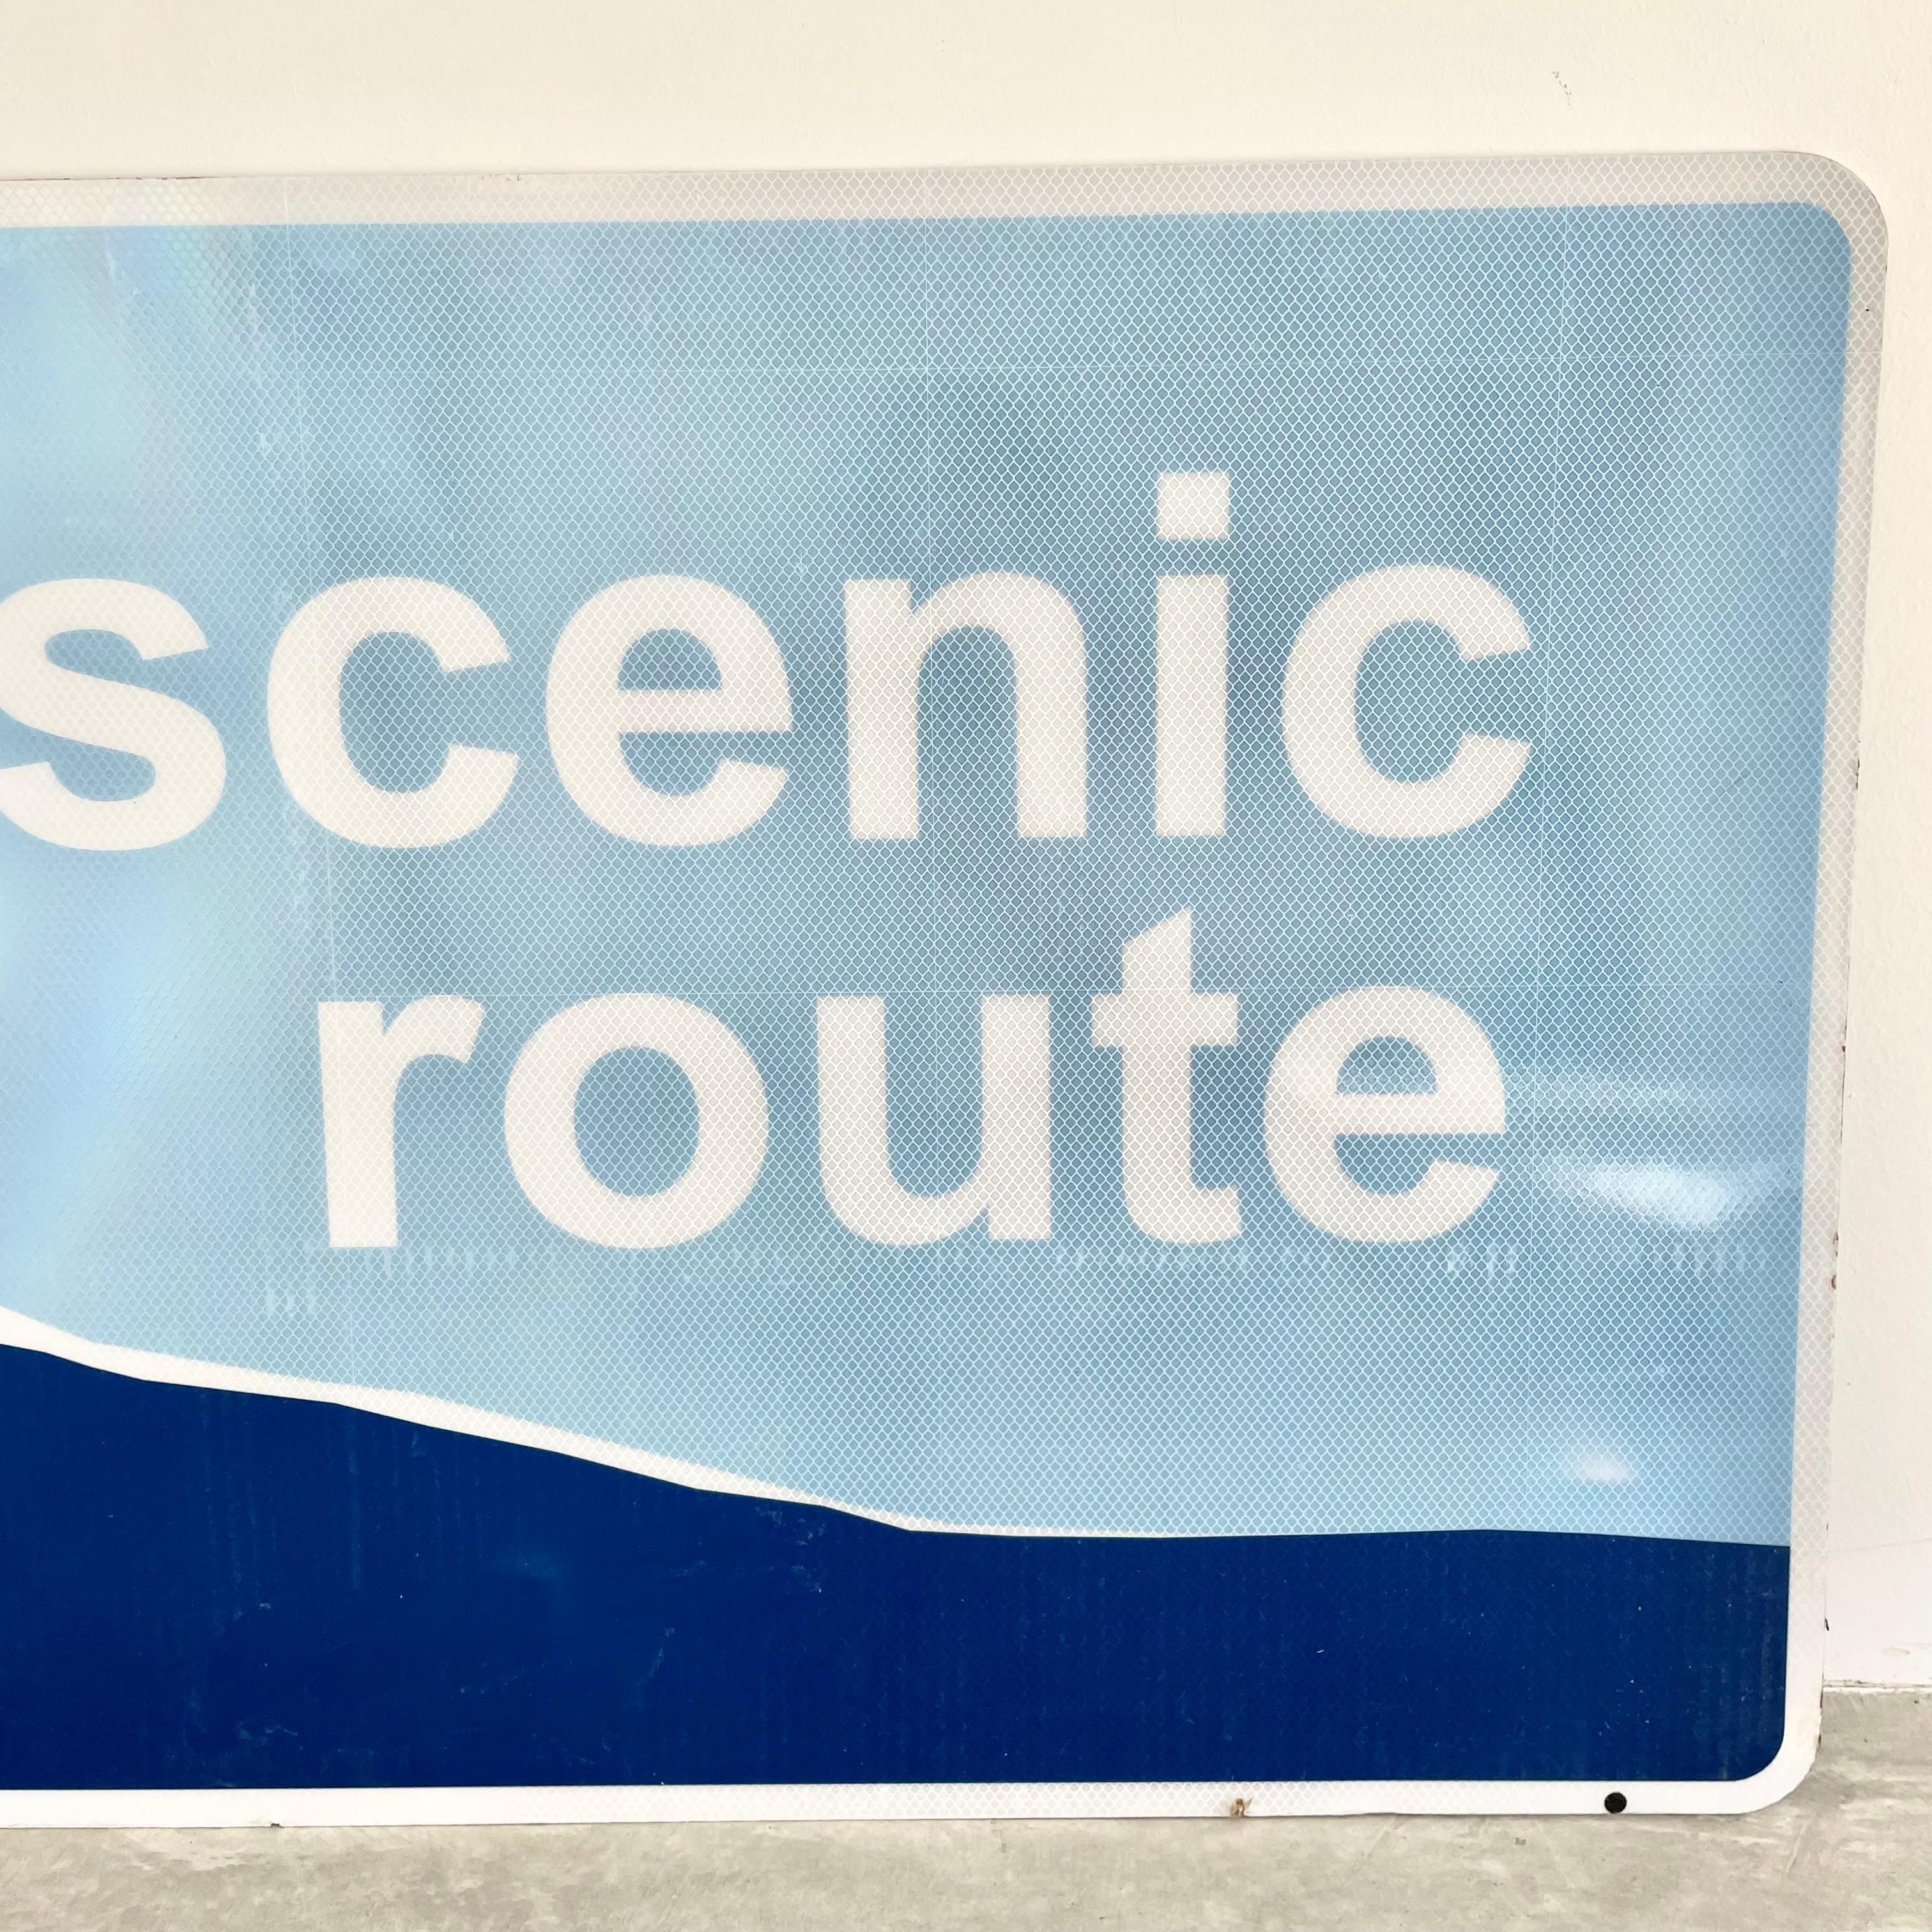 Steel 'Scenic Route' California Highway Sign, USA For Sale